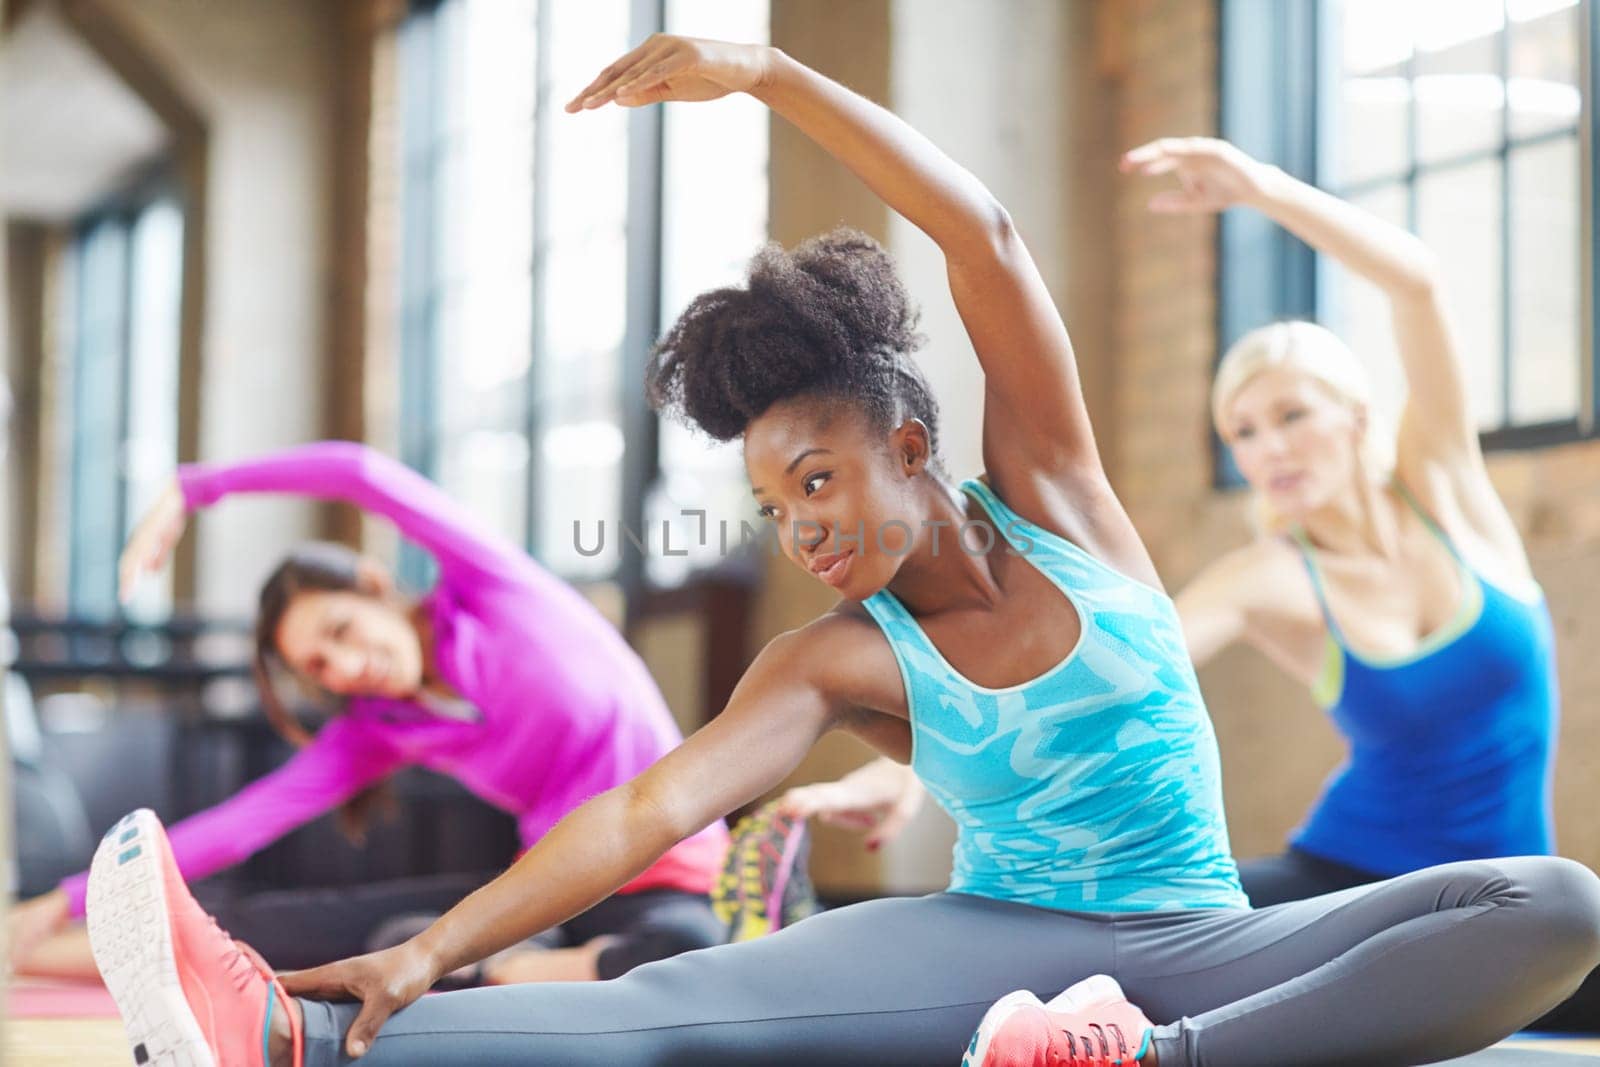 Black woman, instructor and yoga class at gym, stretch and yogi trainer for exercise on mat. Female person, floor and confident for pilates or spiritual fitness, flexibility and health in performance.